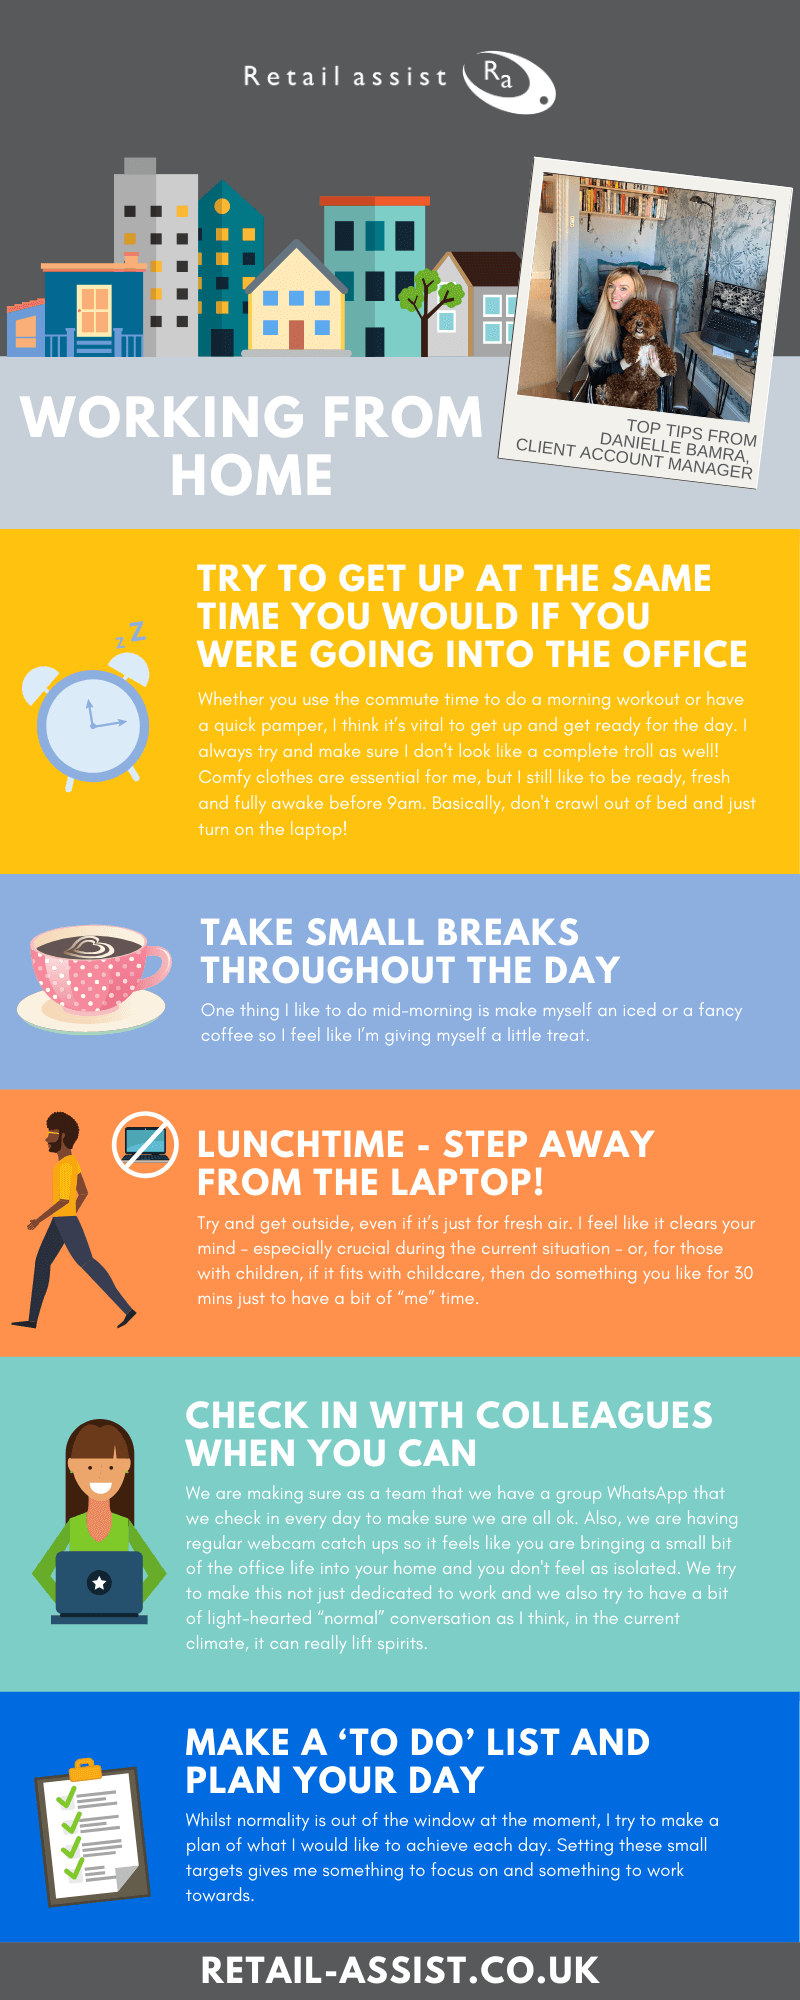 Working from home top tips infographic